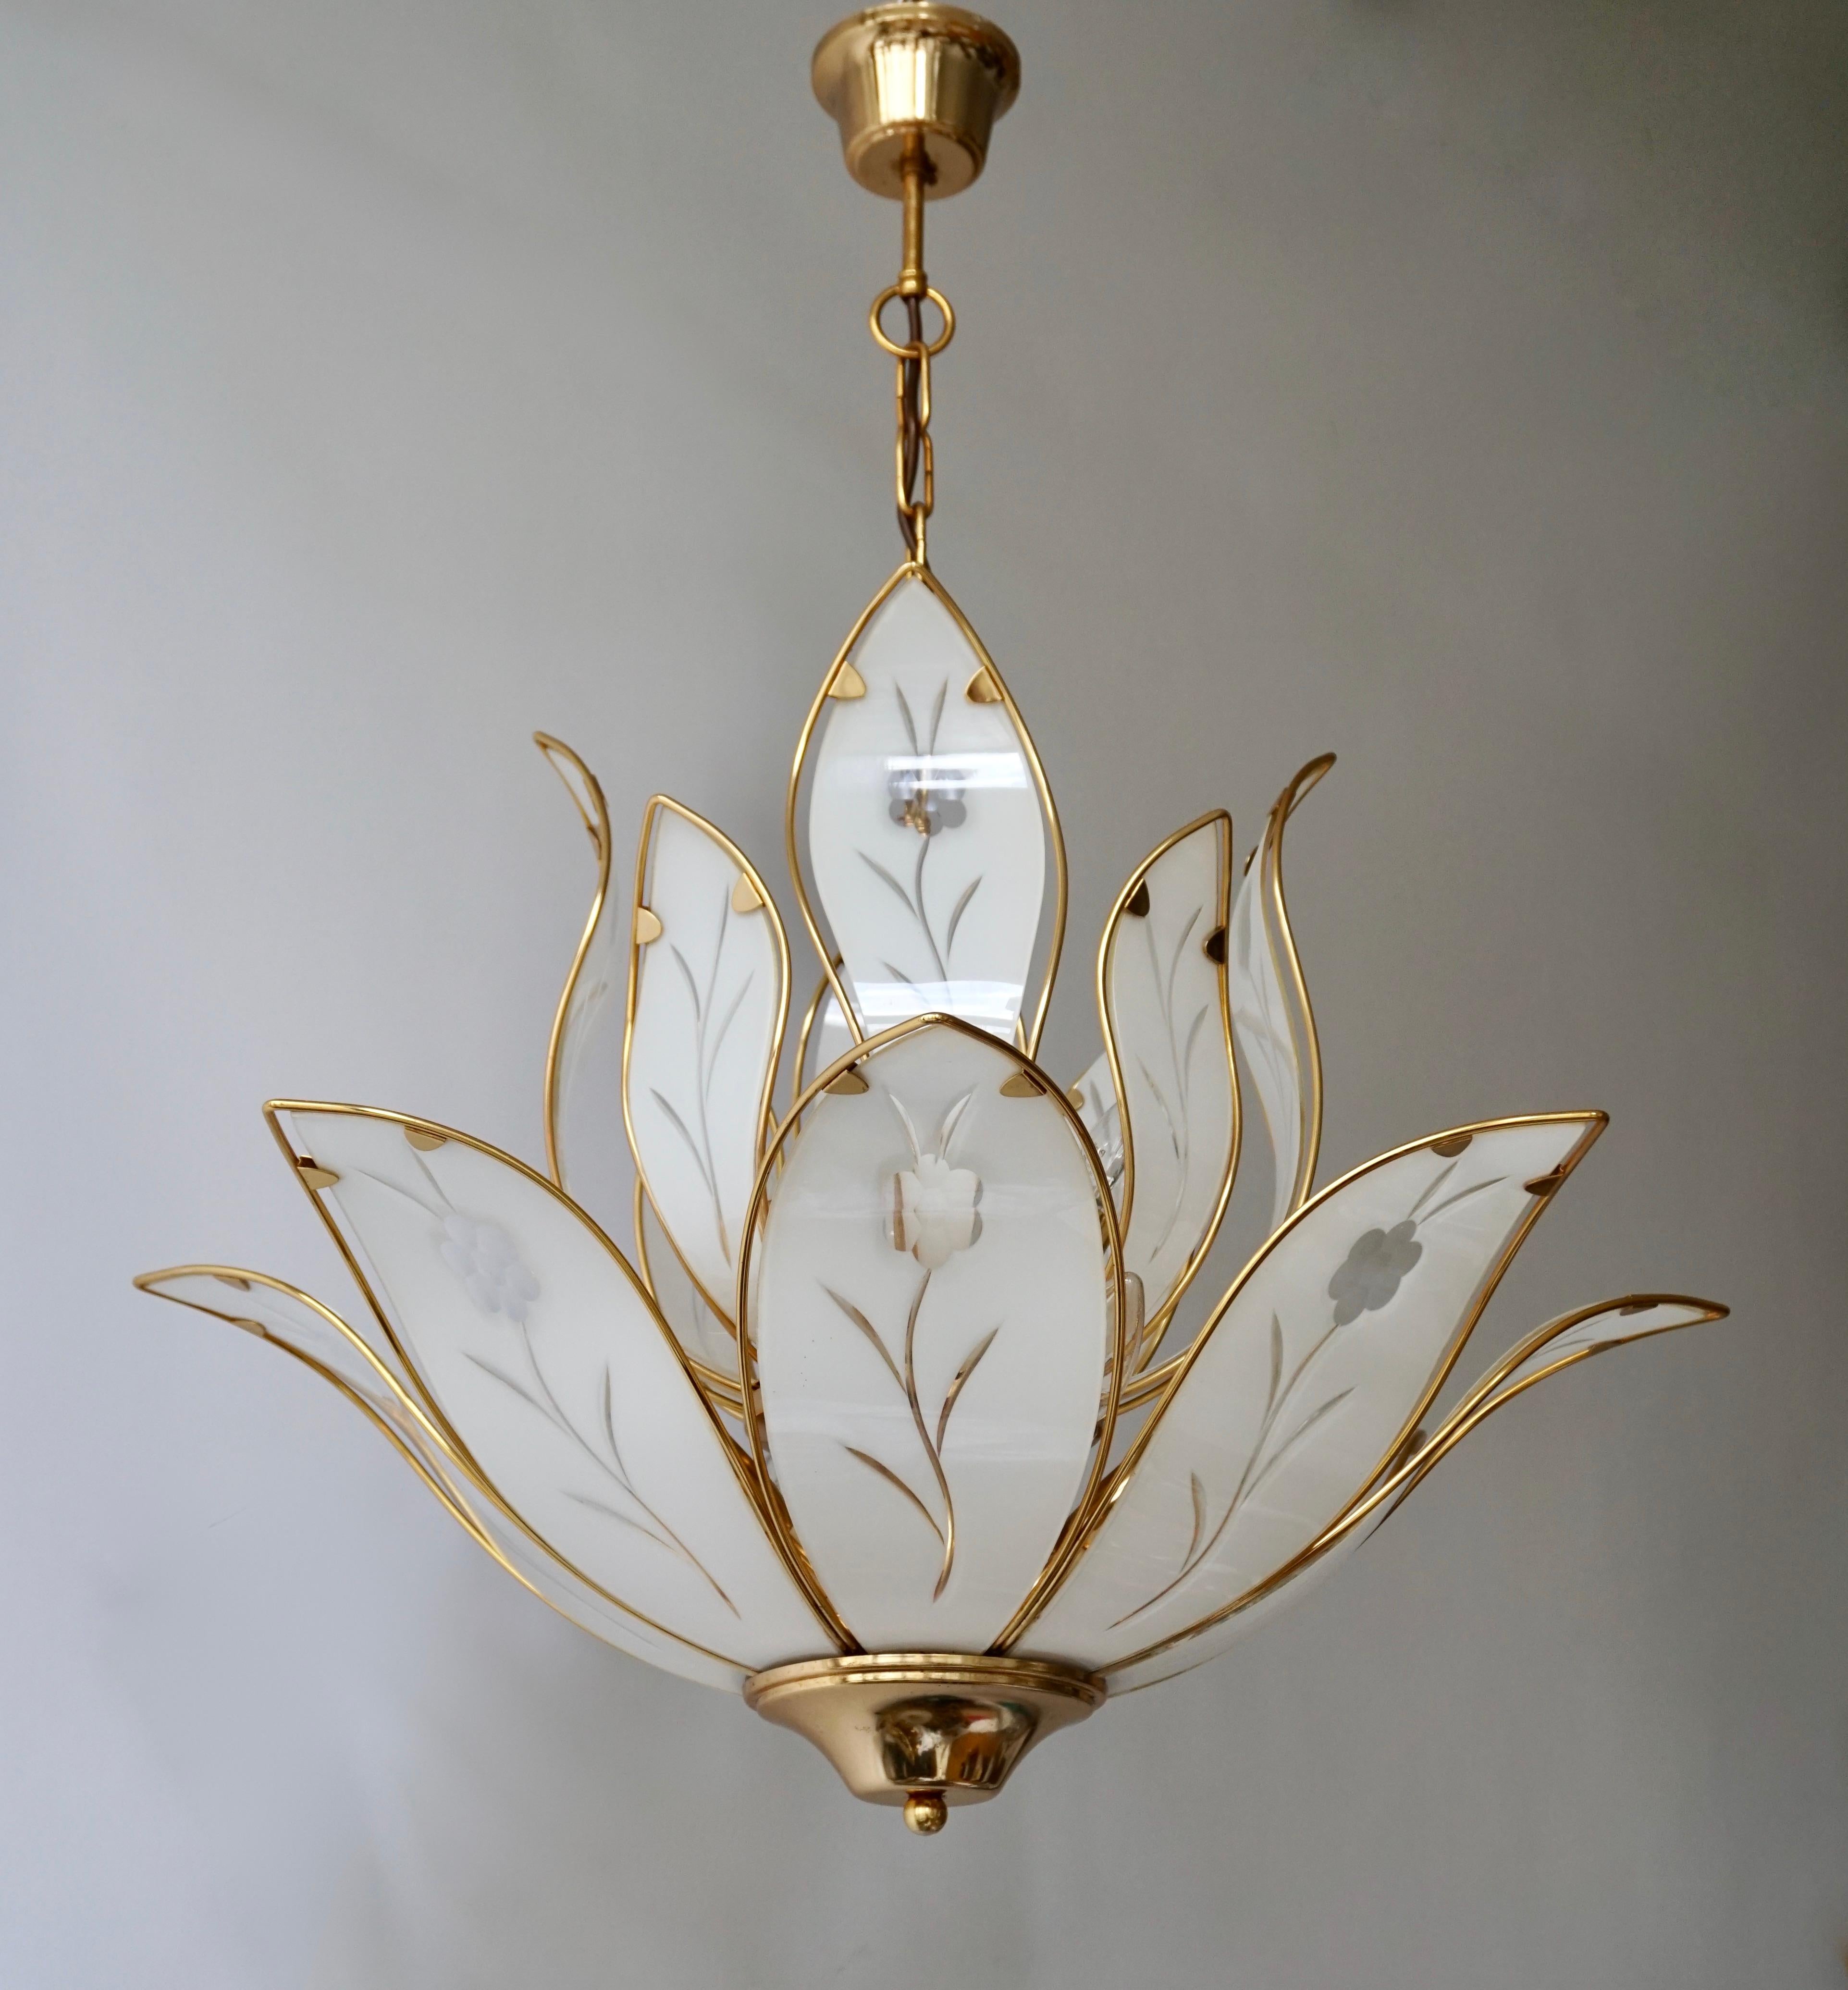 Two Lotus Chandeliers in Brass and White Murano Glass in Franco Luce Style For Sale 3